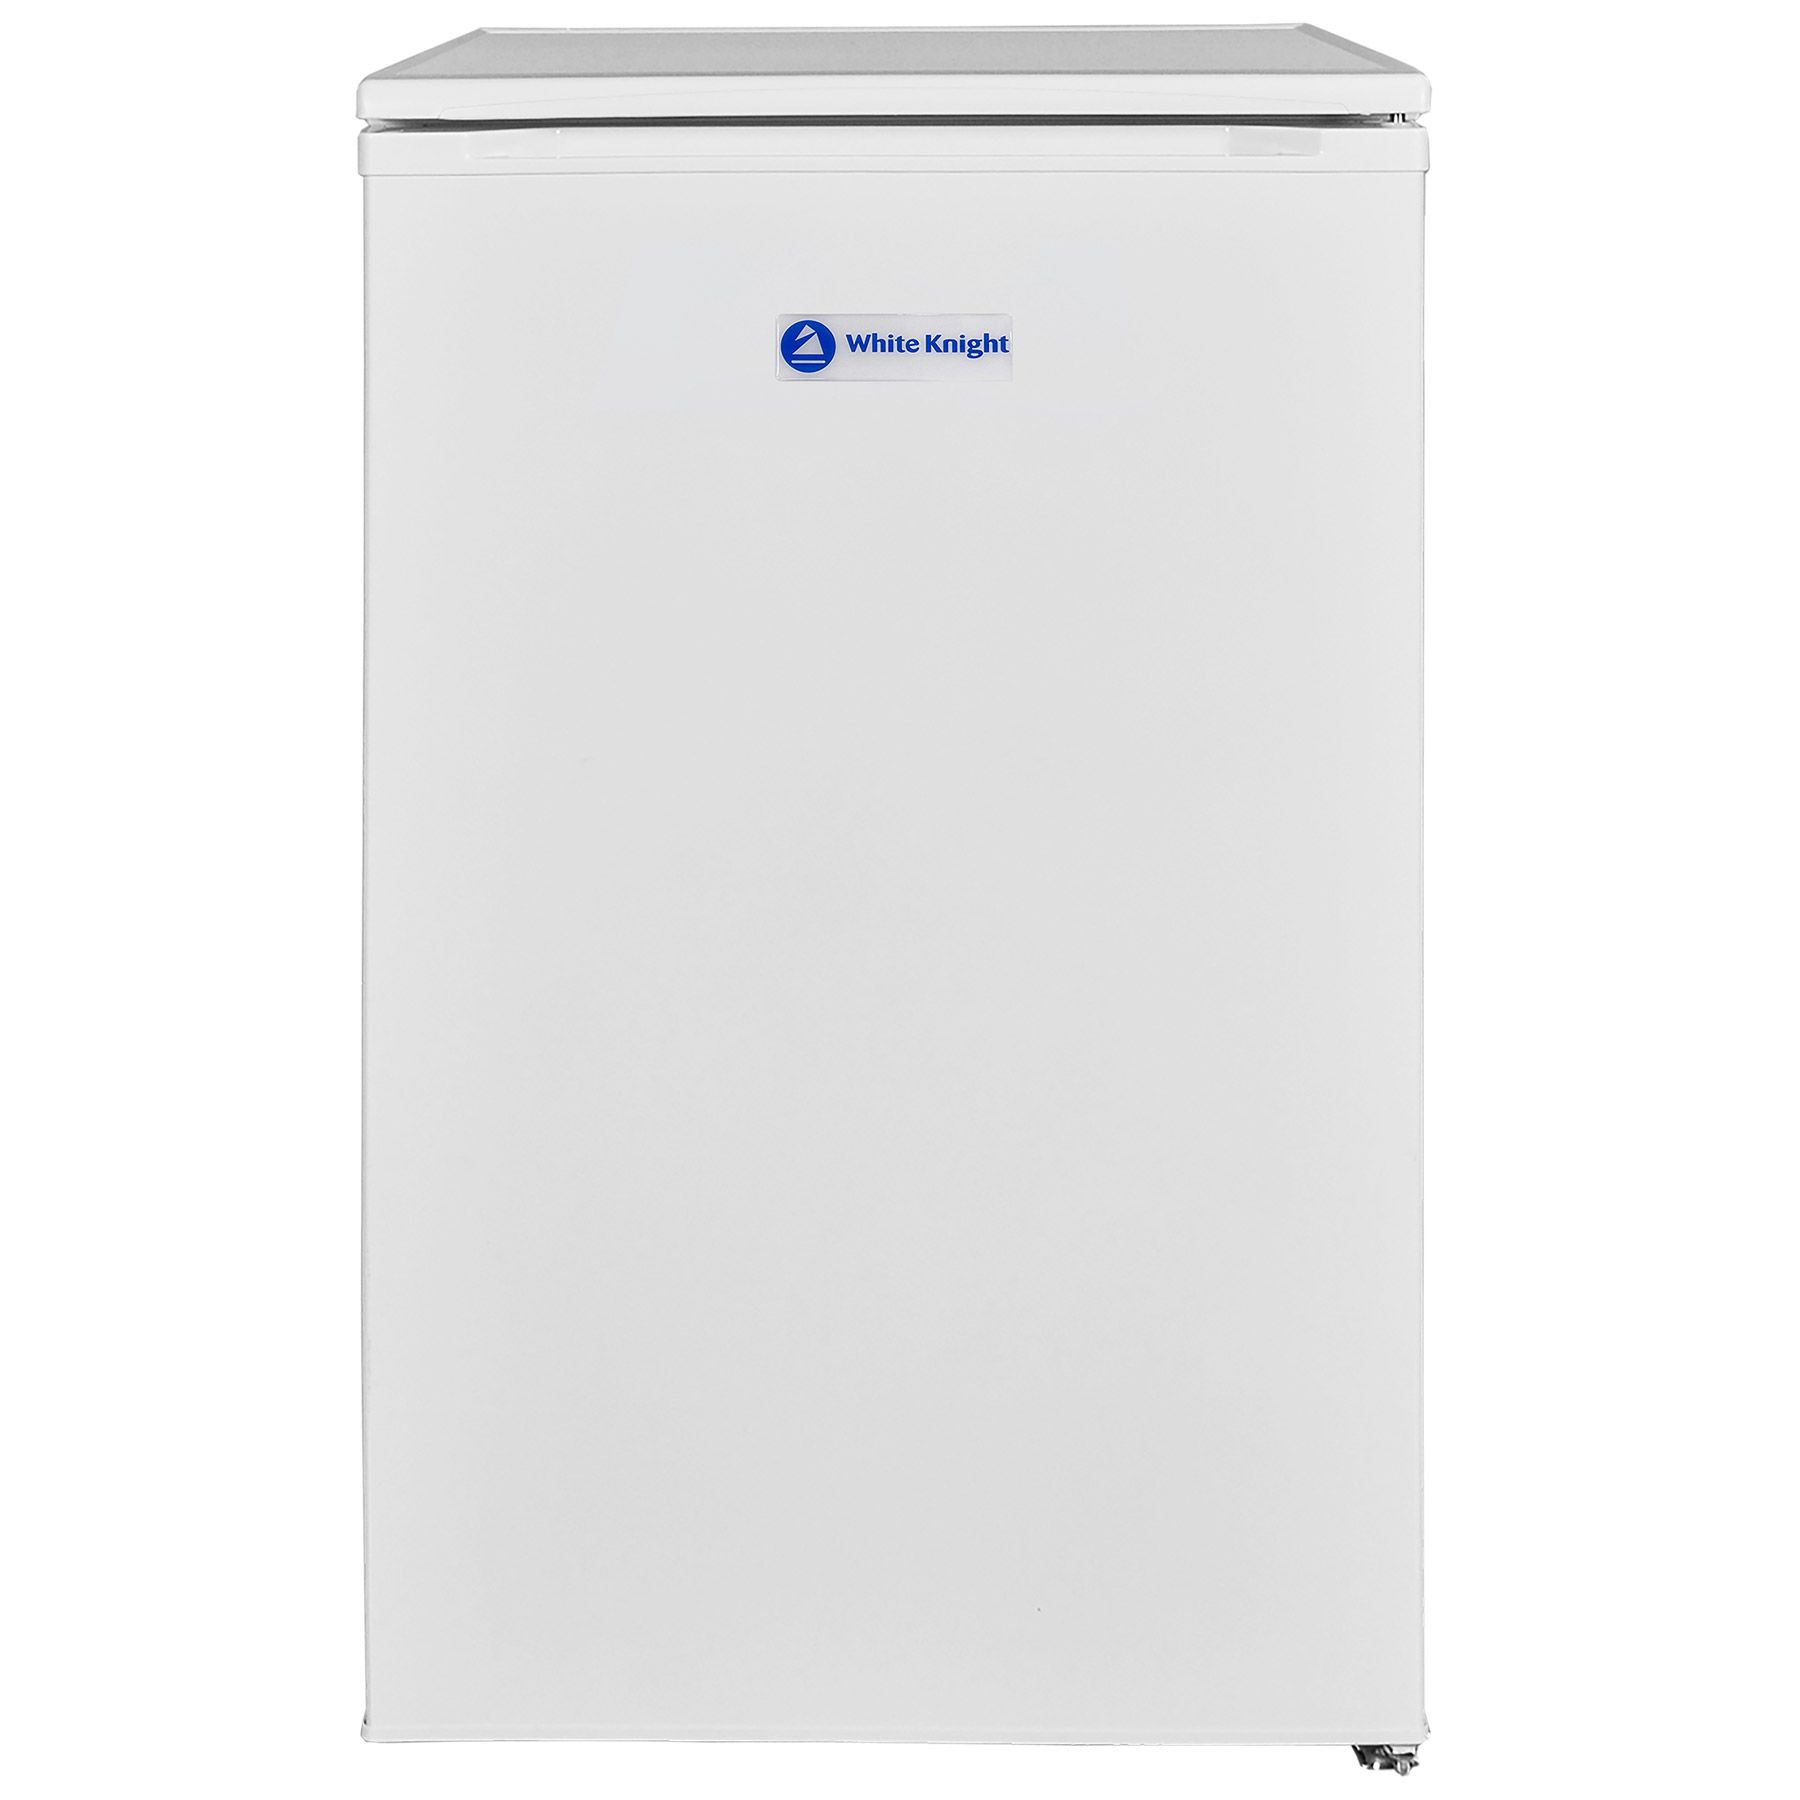 Image of White Knight DAF150H 50cm Undercounter Fridge in White Icebox F Rated